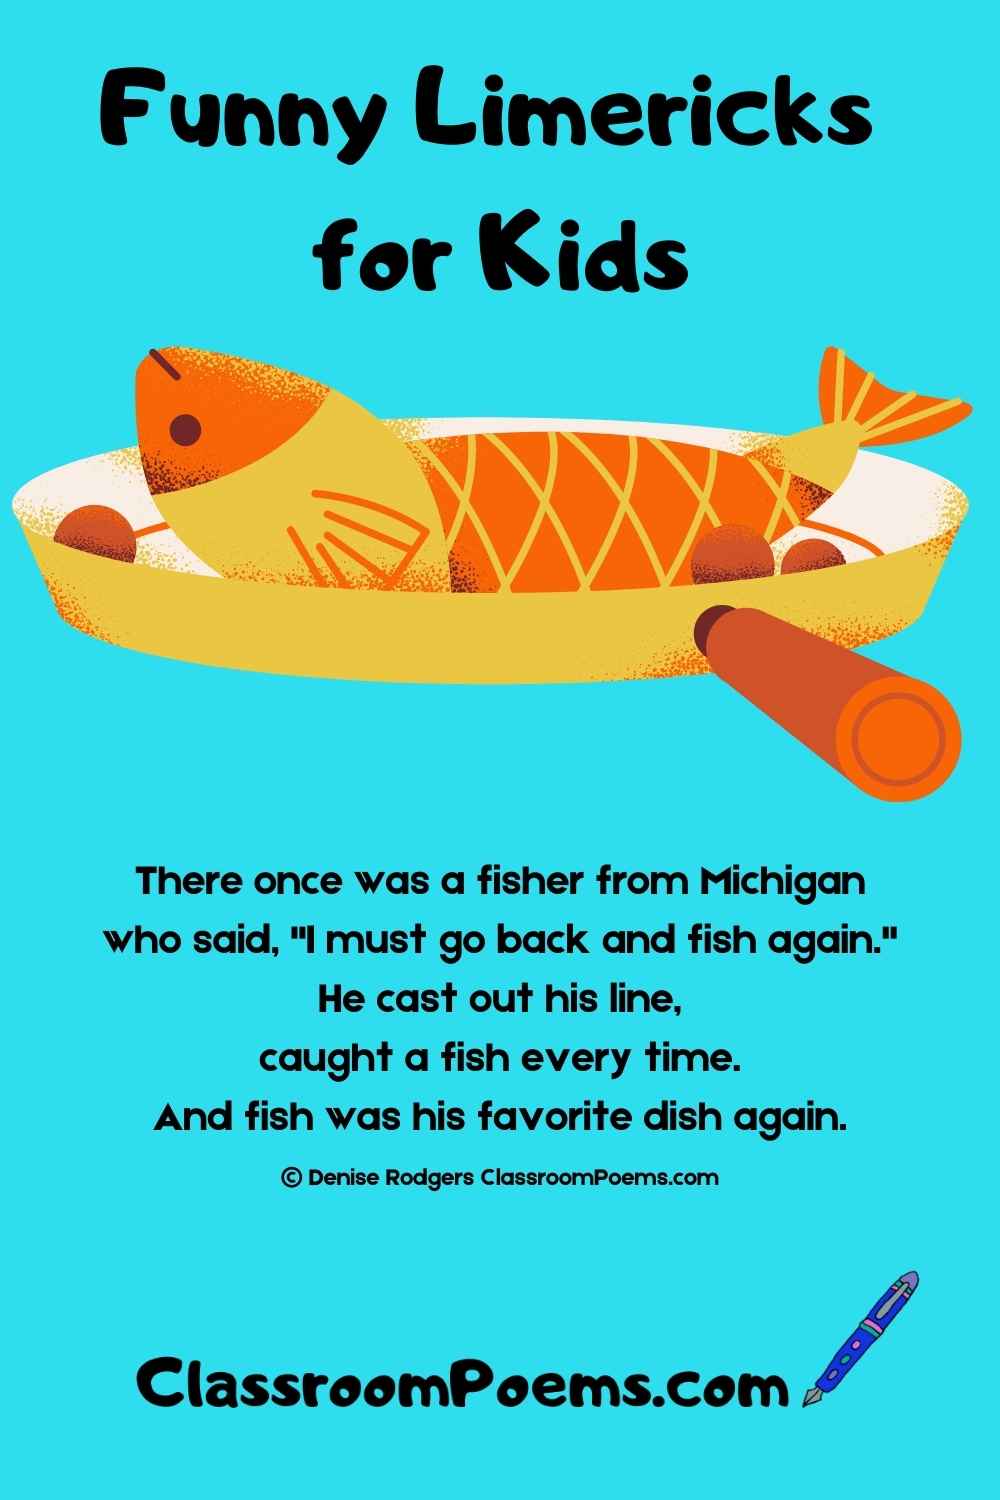 Funny Limericks by Denise Rodgers on ClassroomPoems.com.